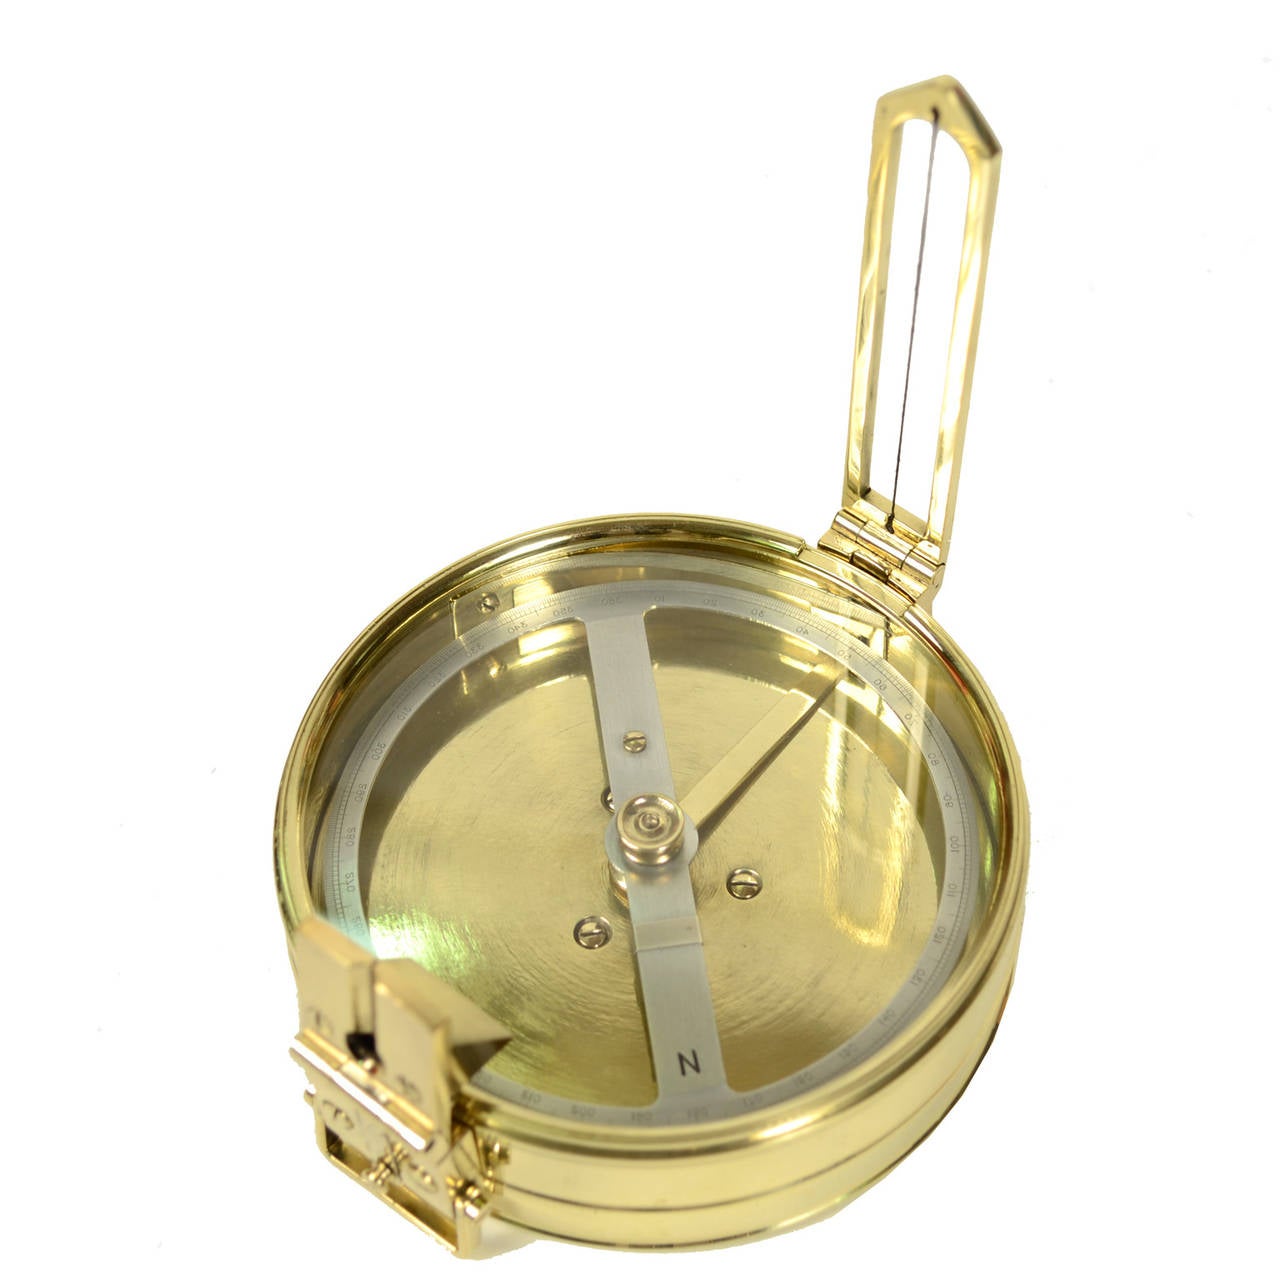 Rare survey compass, brass with leather case, signed F.B. & S. 1932 ltd. Diameter of compass cm 10, height cm 3. Very good condition and in order. 
Frances Barker & Son was established as F. Barker in London in 1848. In that same year, the owner